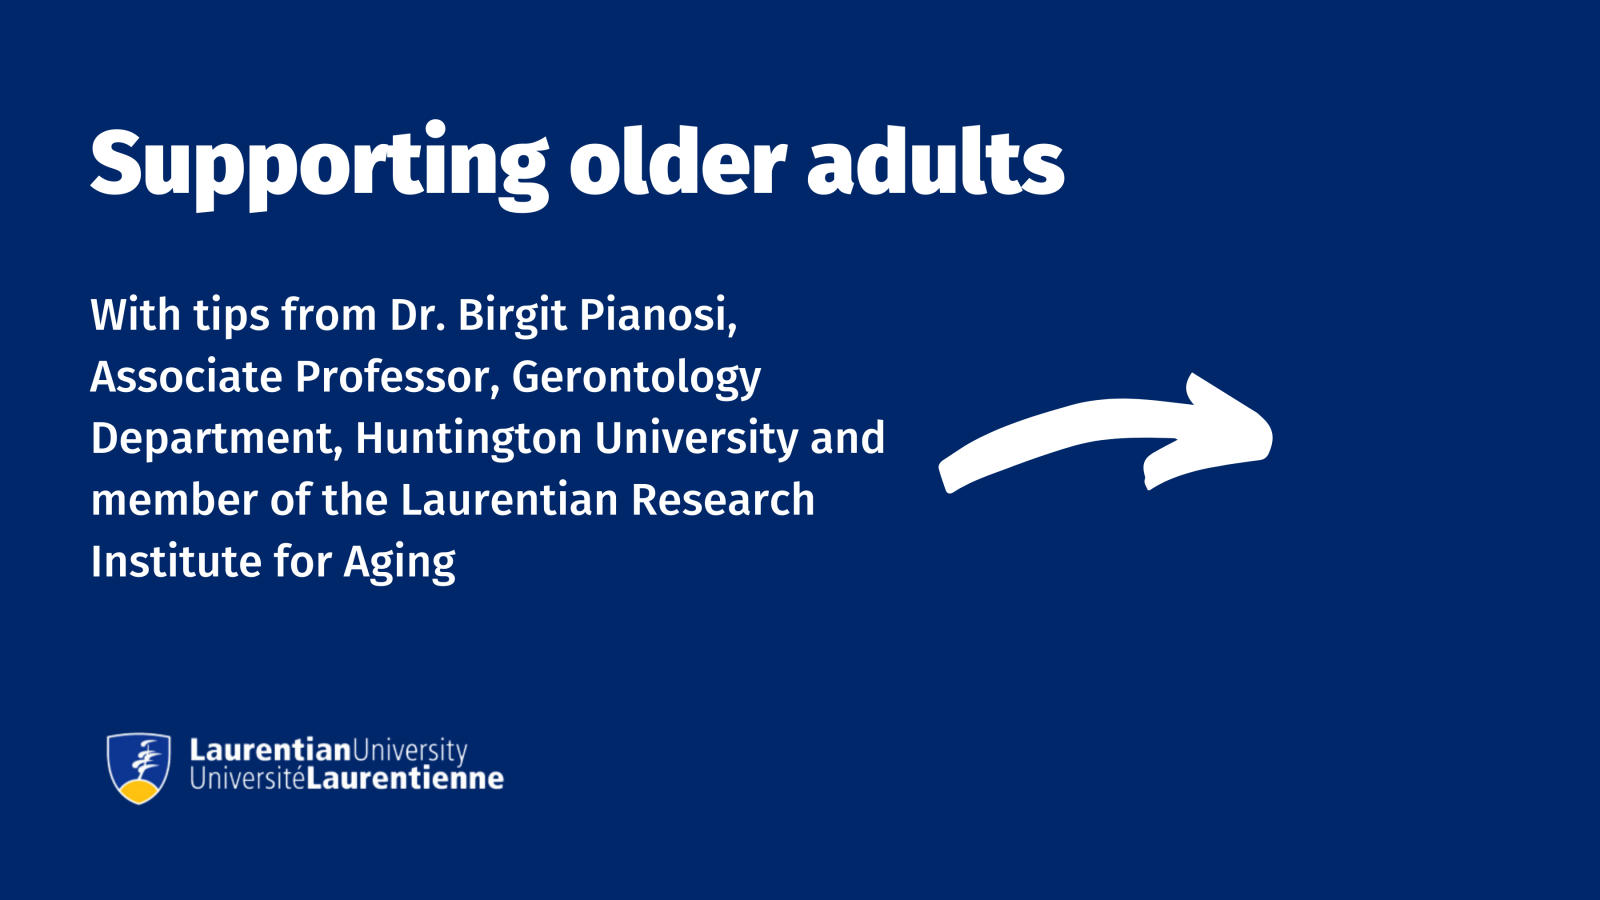 Support older adult tips from Dr. Birgit Pianosi